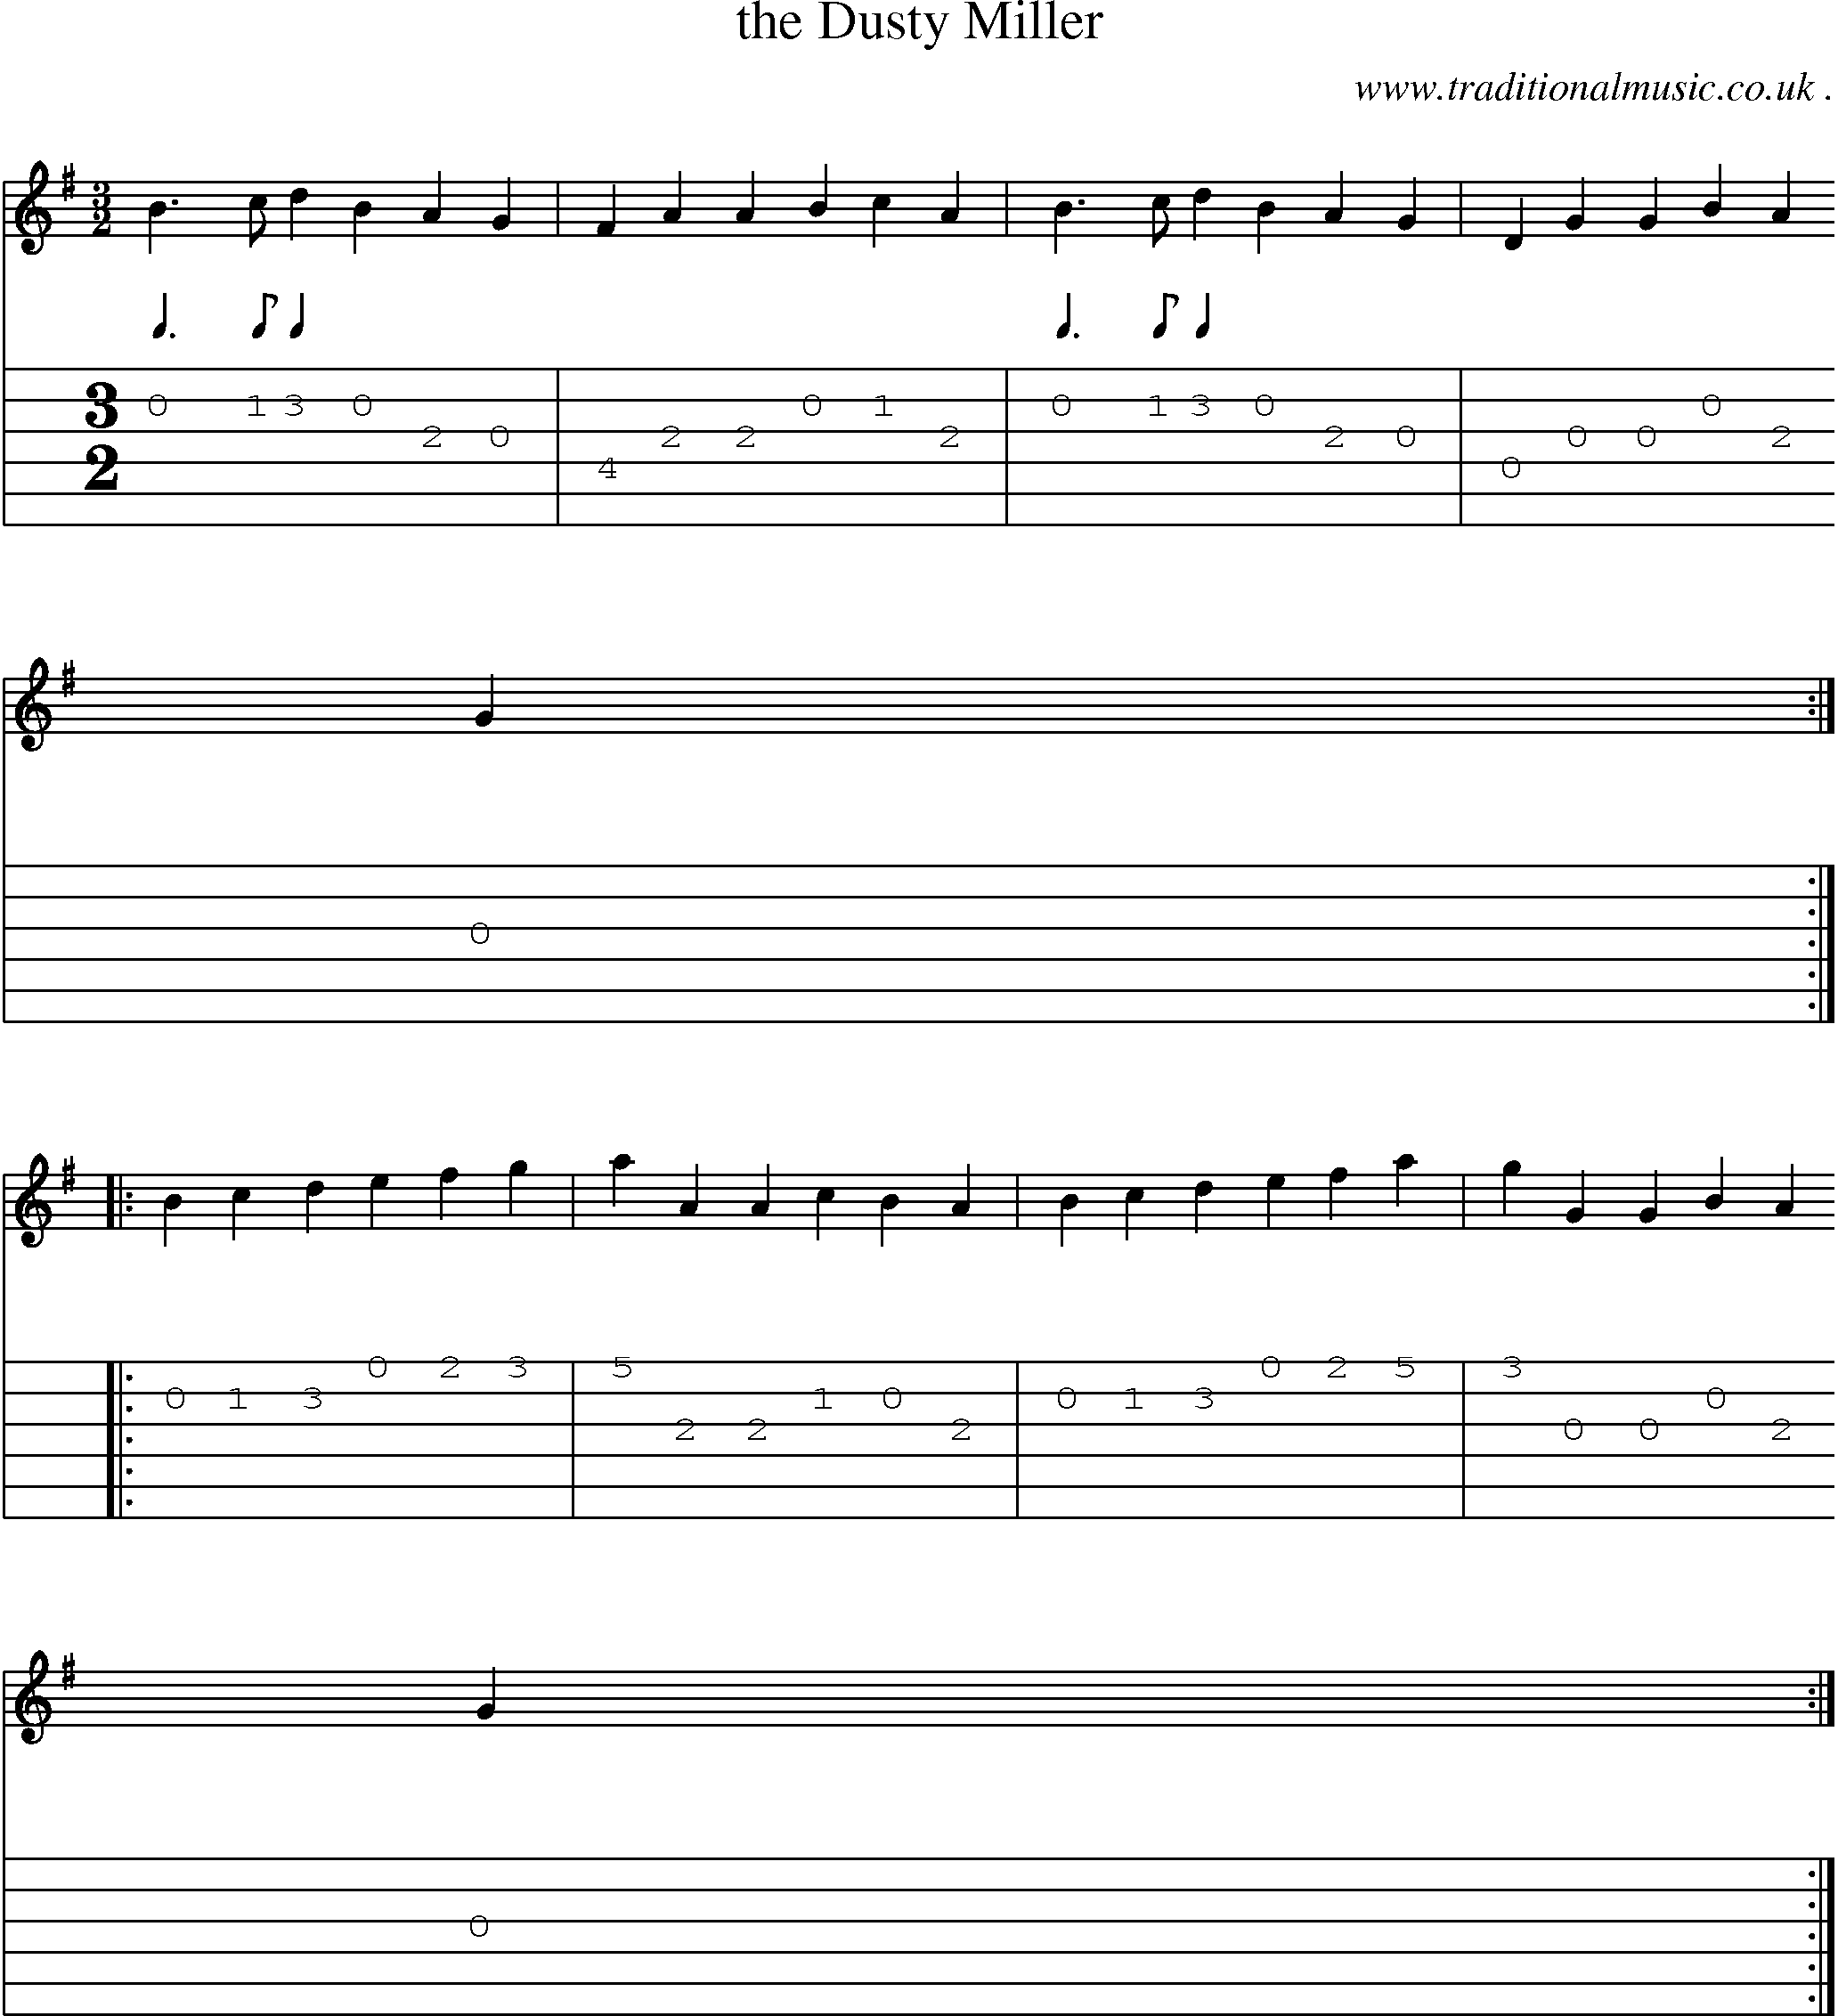 Sheet-Music and Guitar Tabs for The Dusty Miller